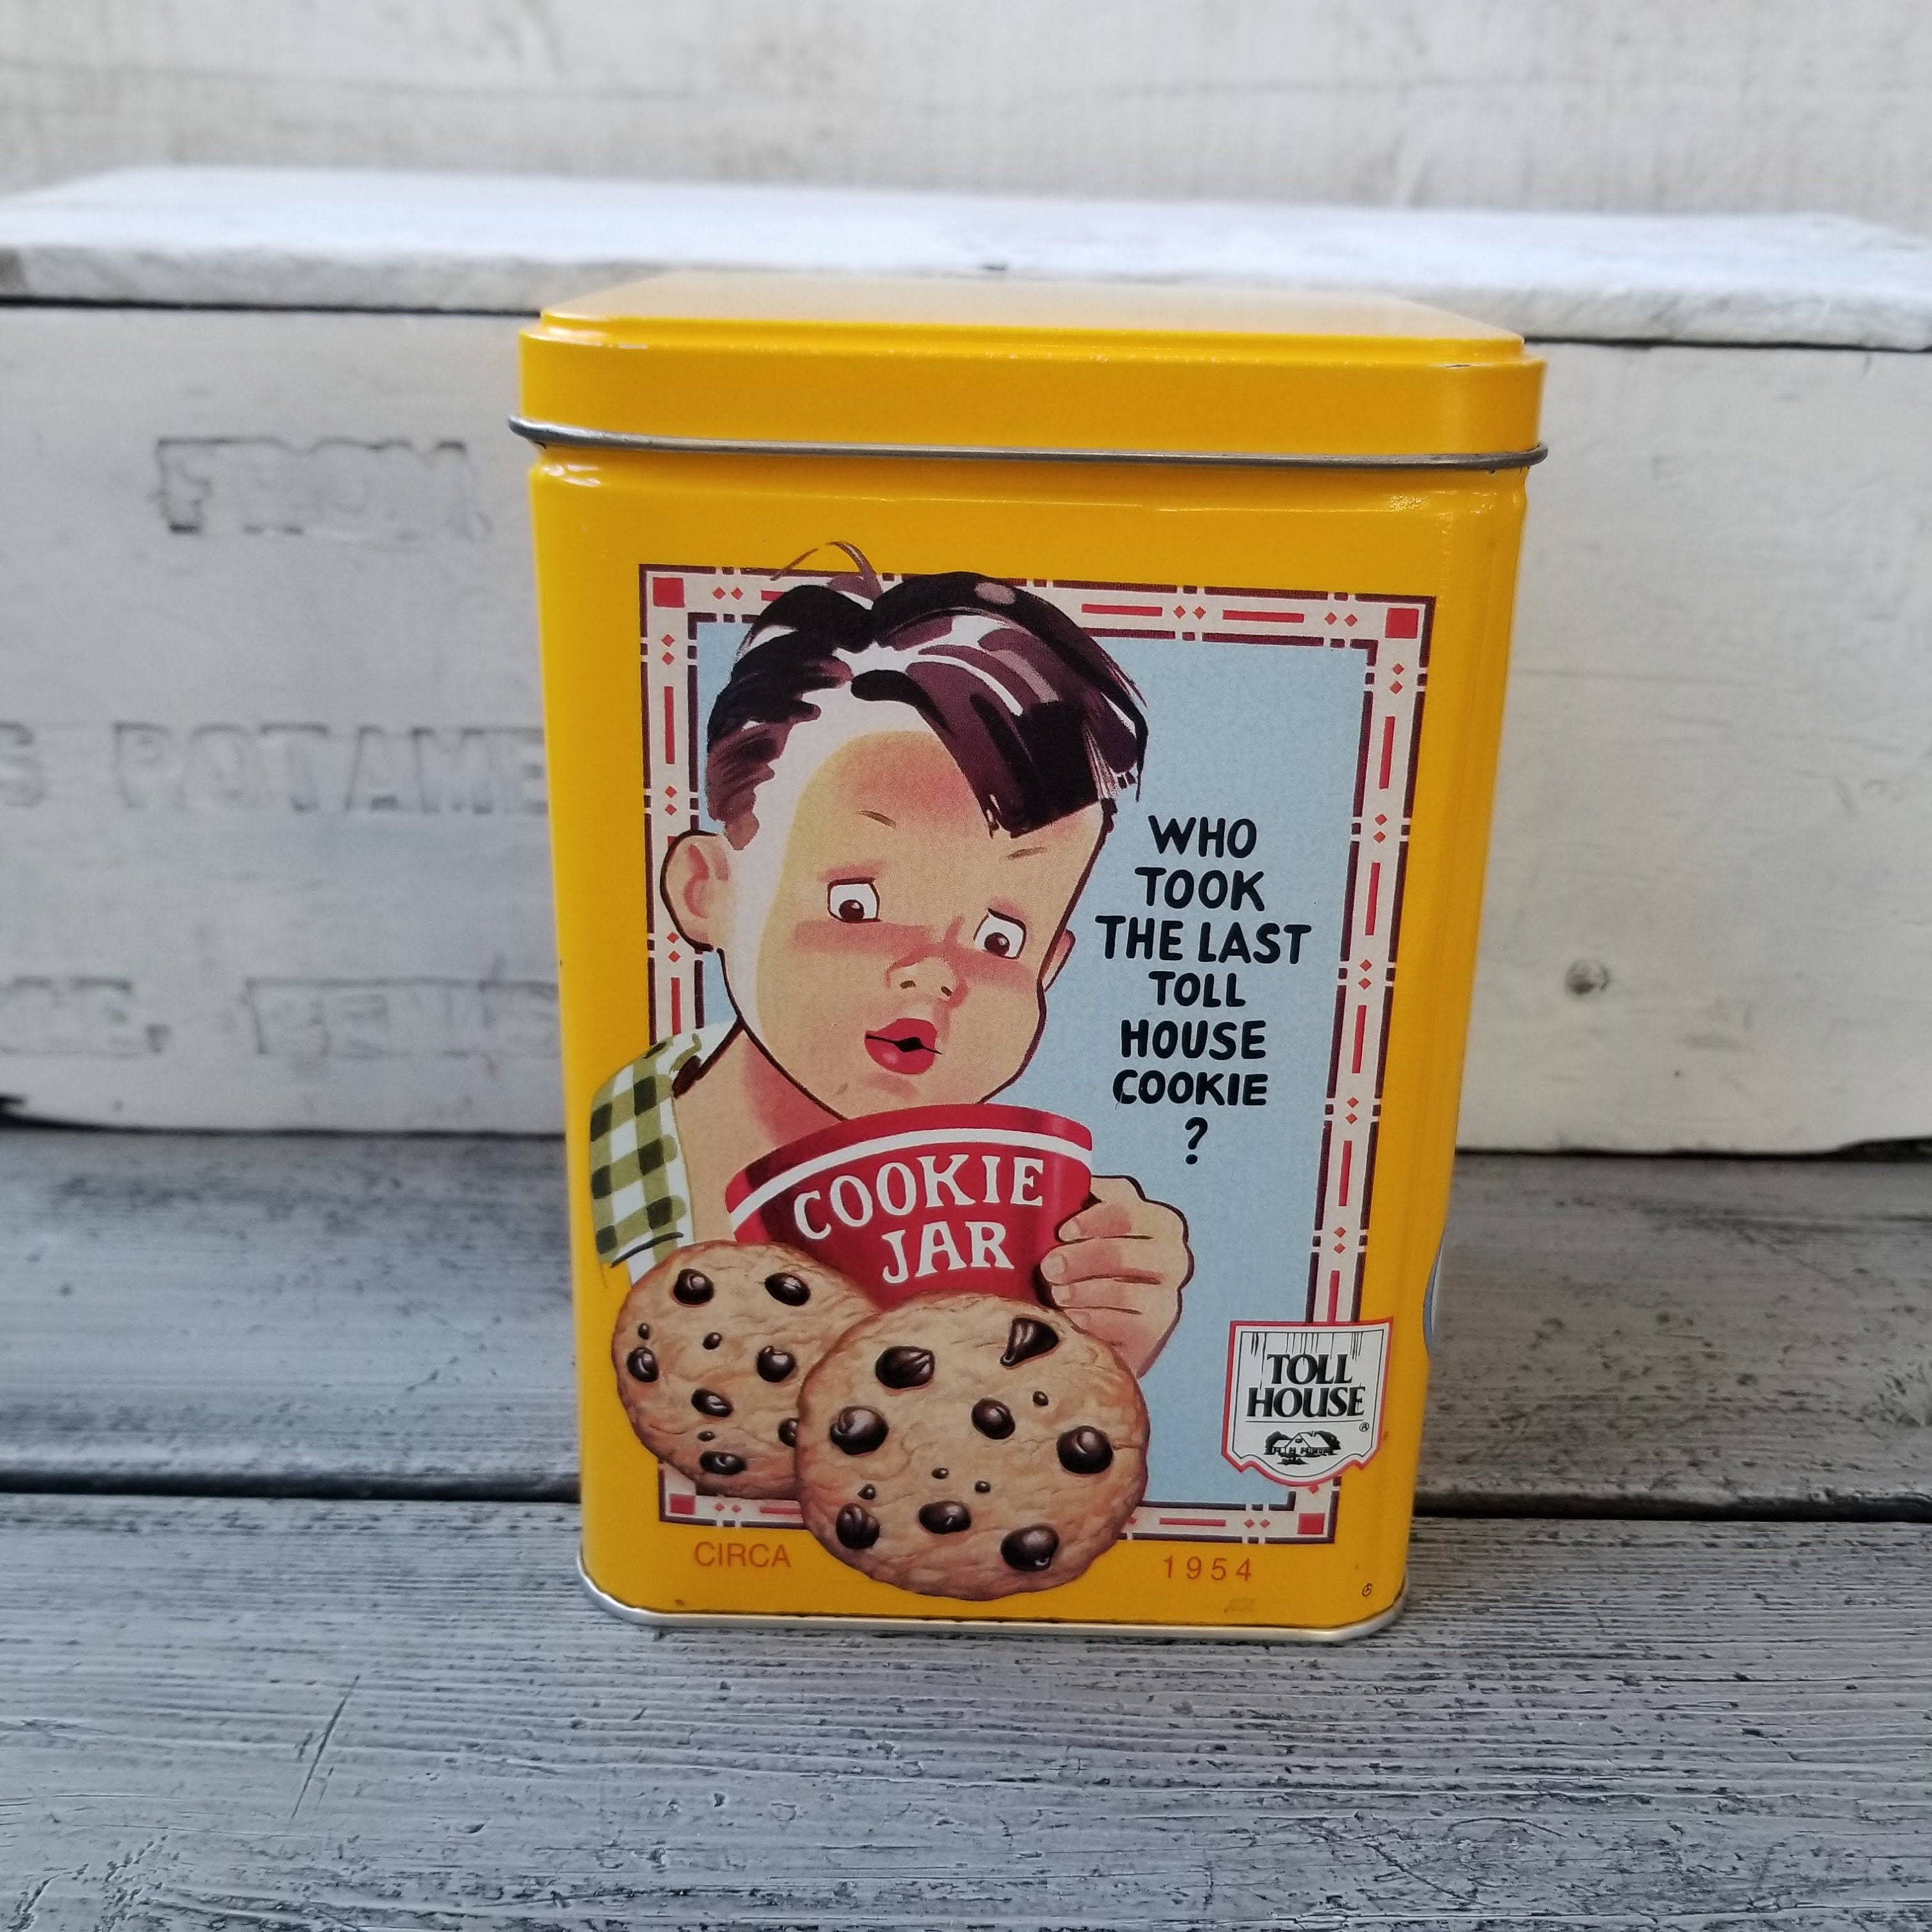 Vintage Toll House Cookie Tin Box – The Swan's House